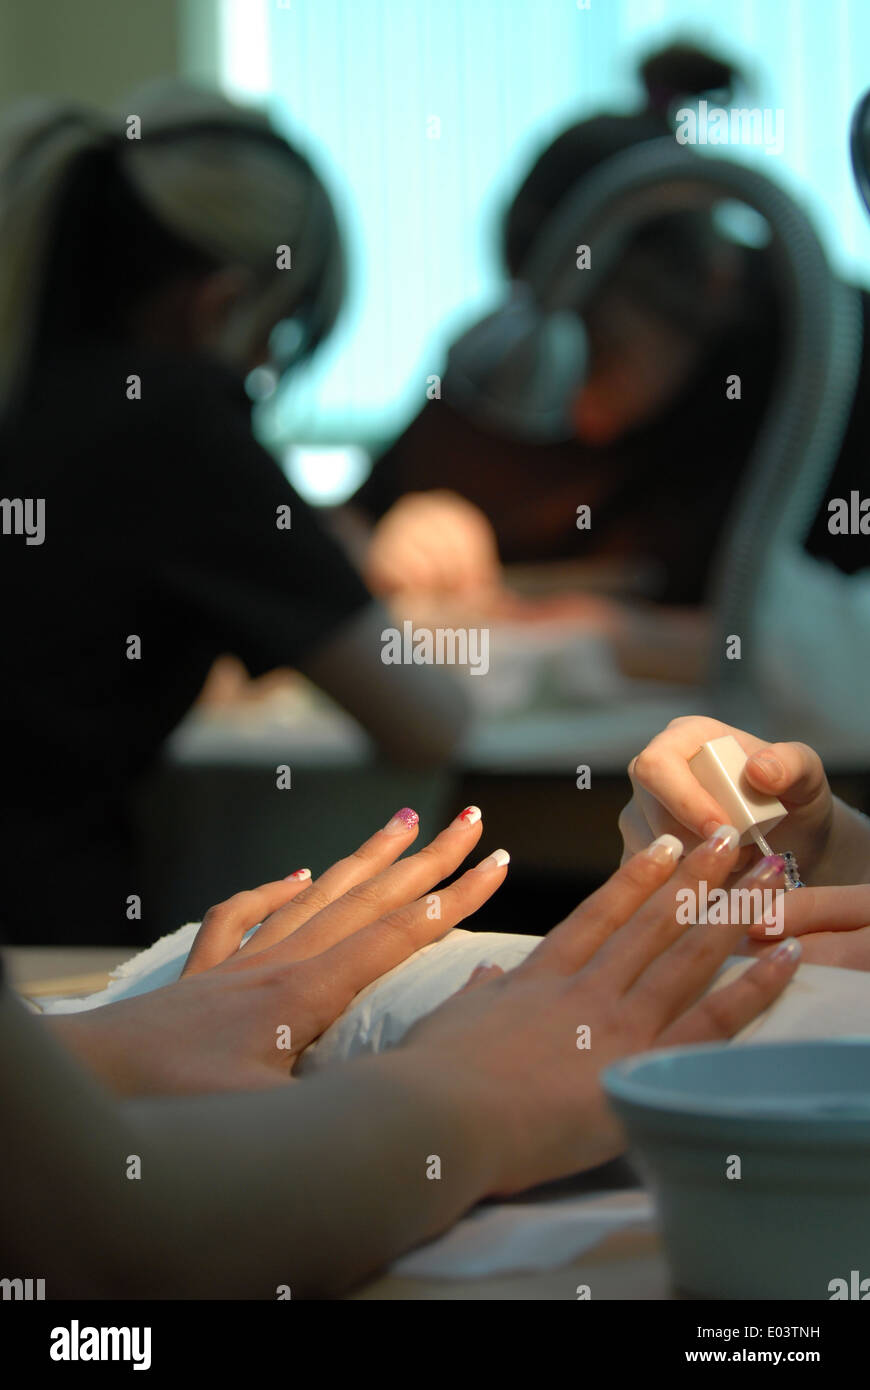 Hands at a nail bar, or having a manicure. Stock Photo